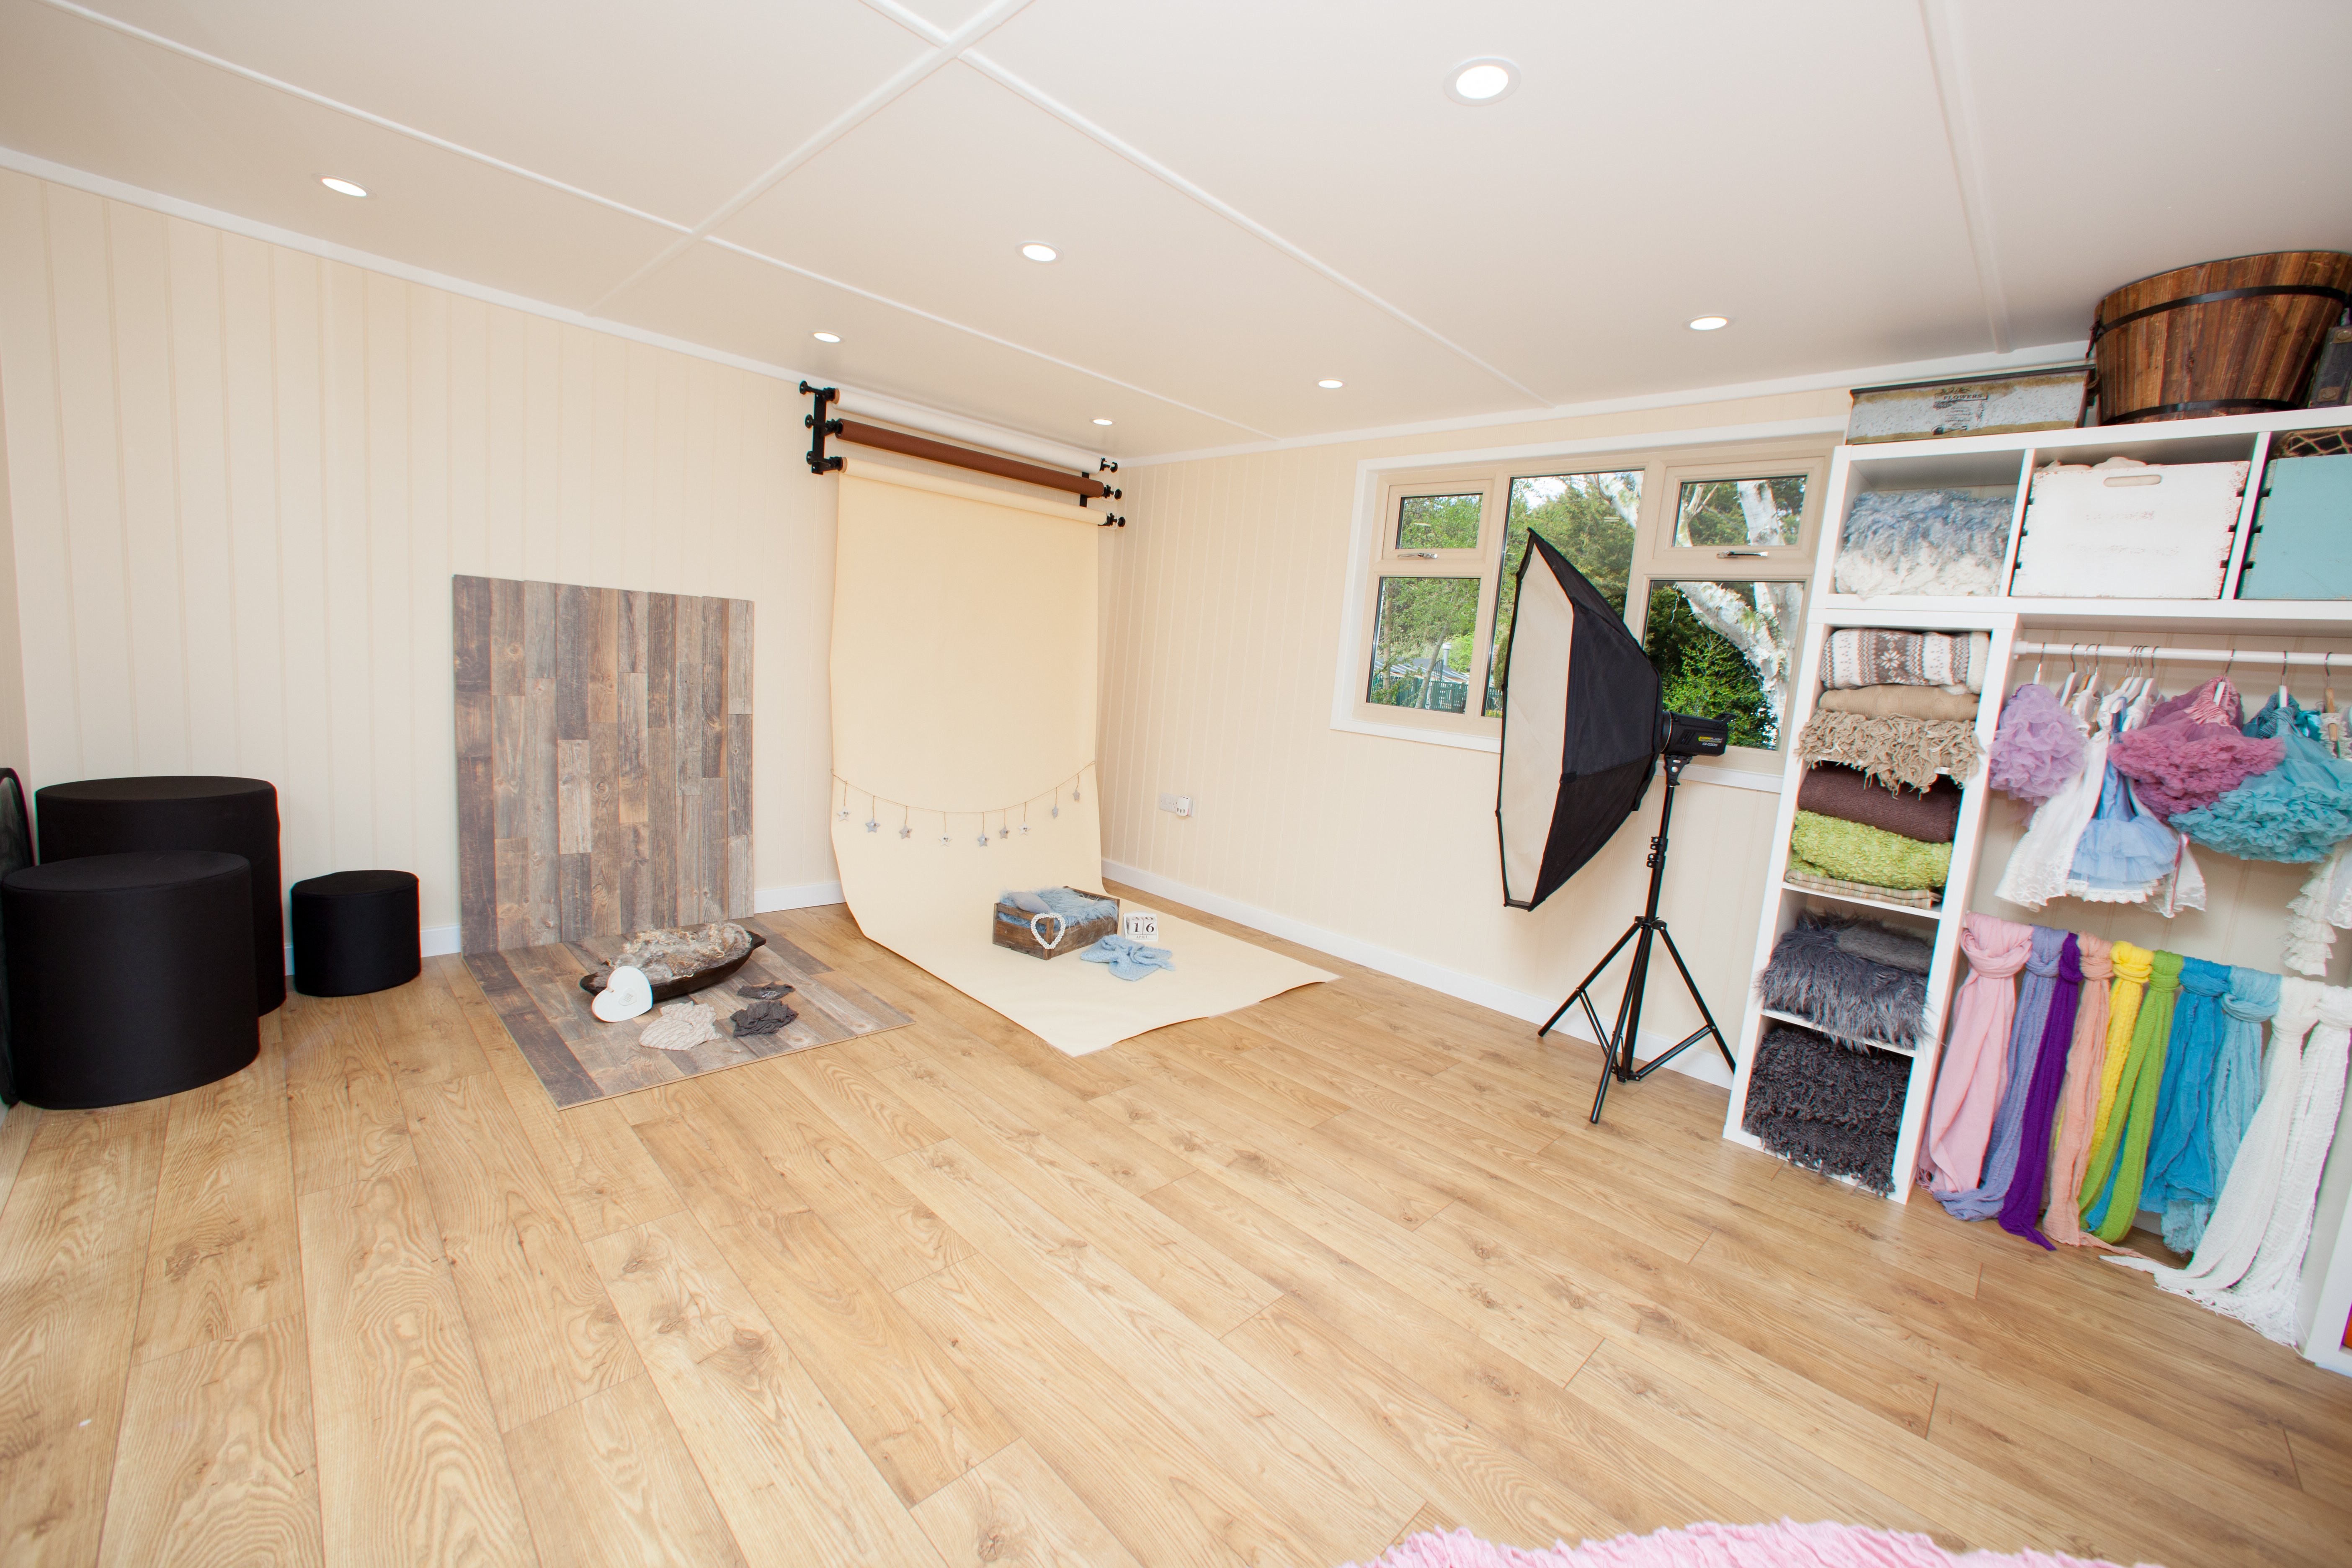 How To Set Up A Home Photography Studio? - By Investing In A Garden Cabin!